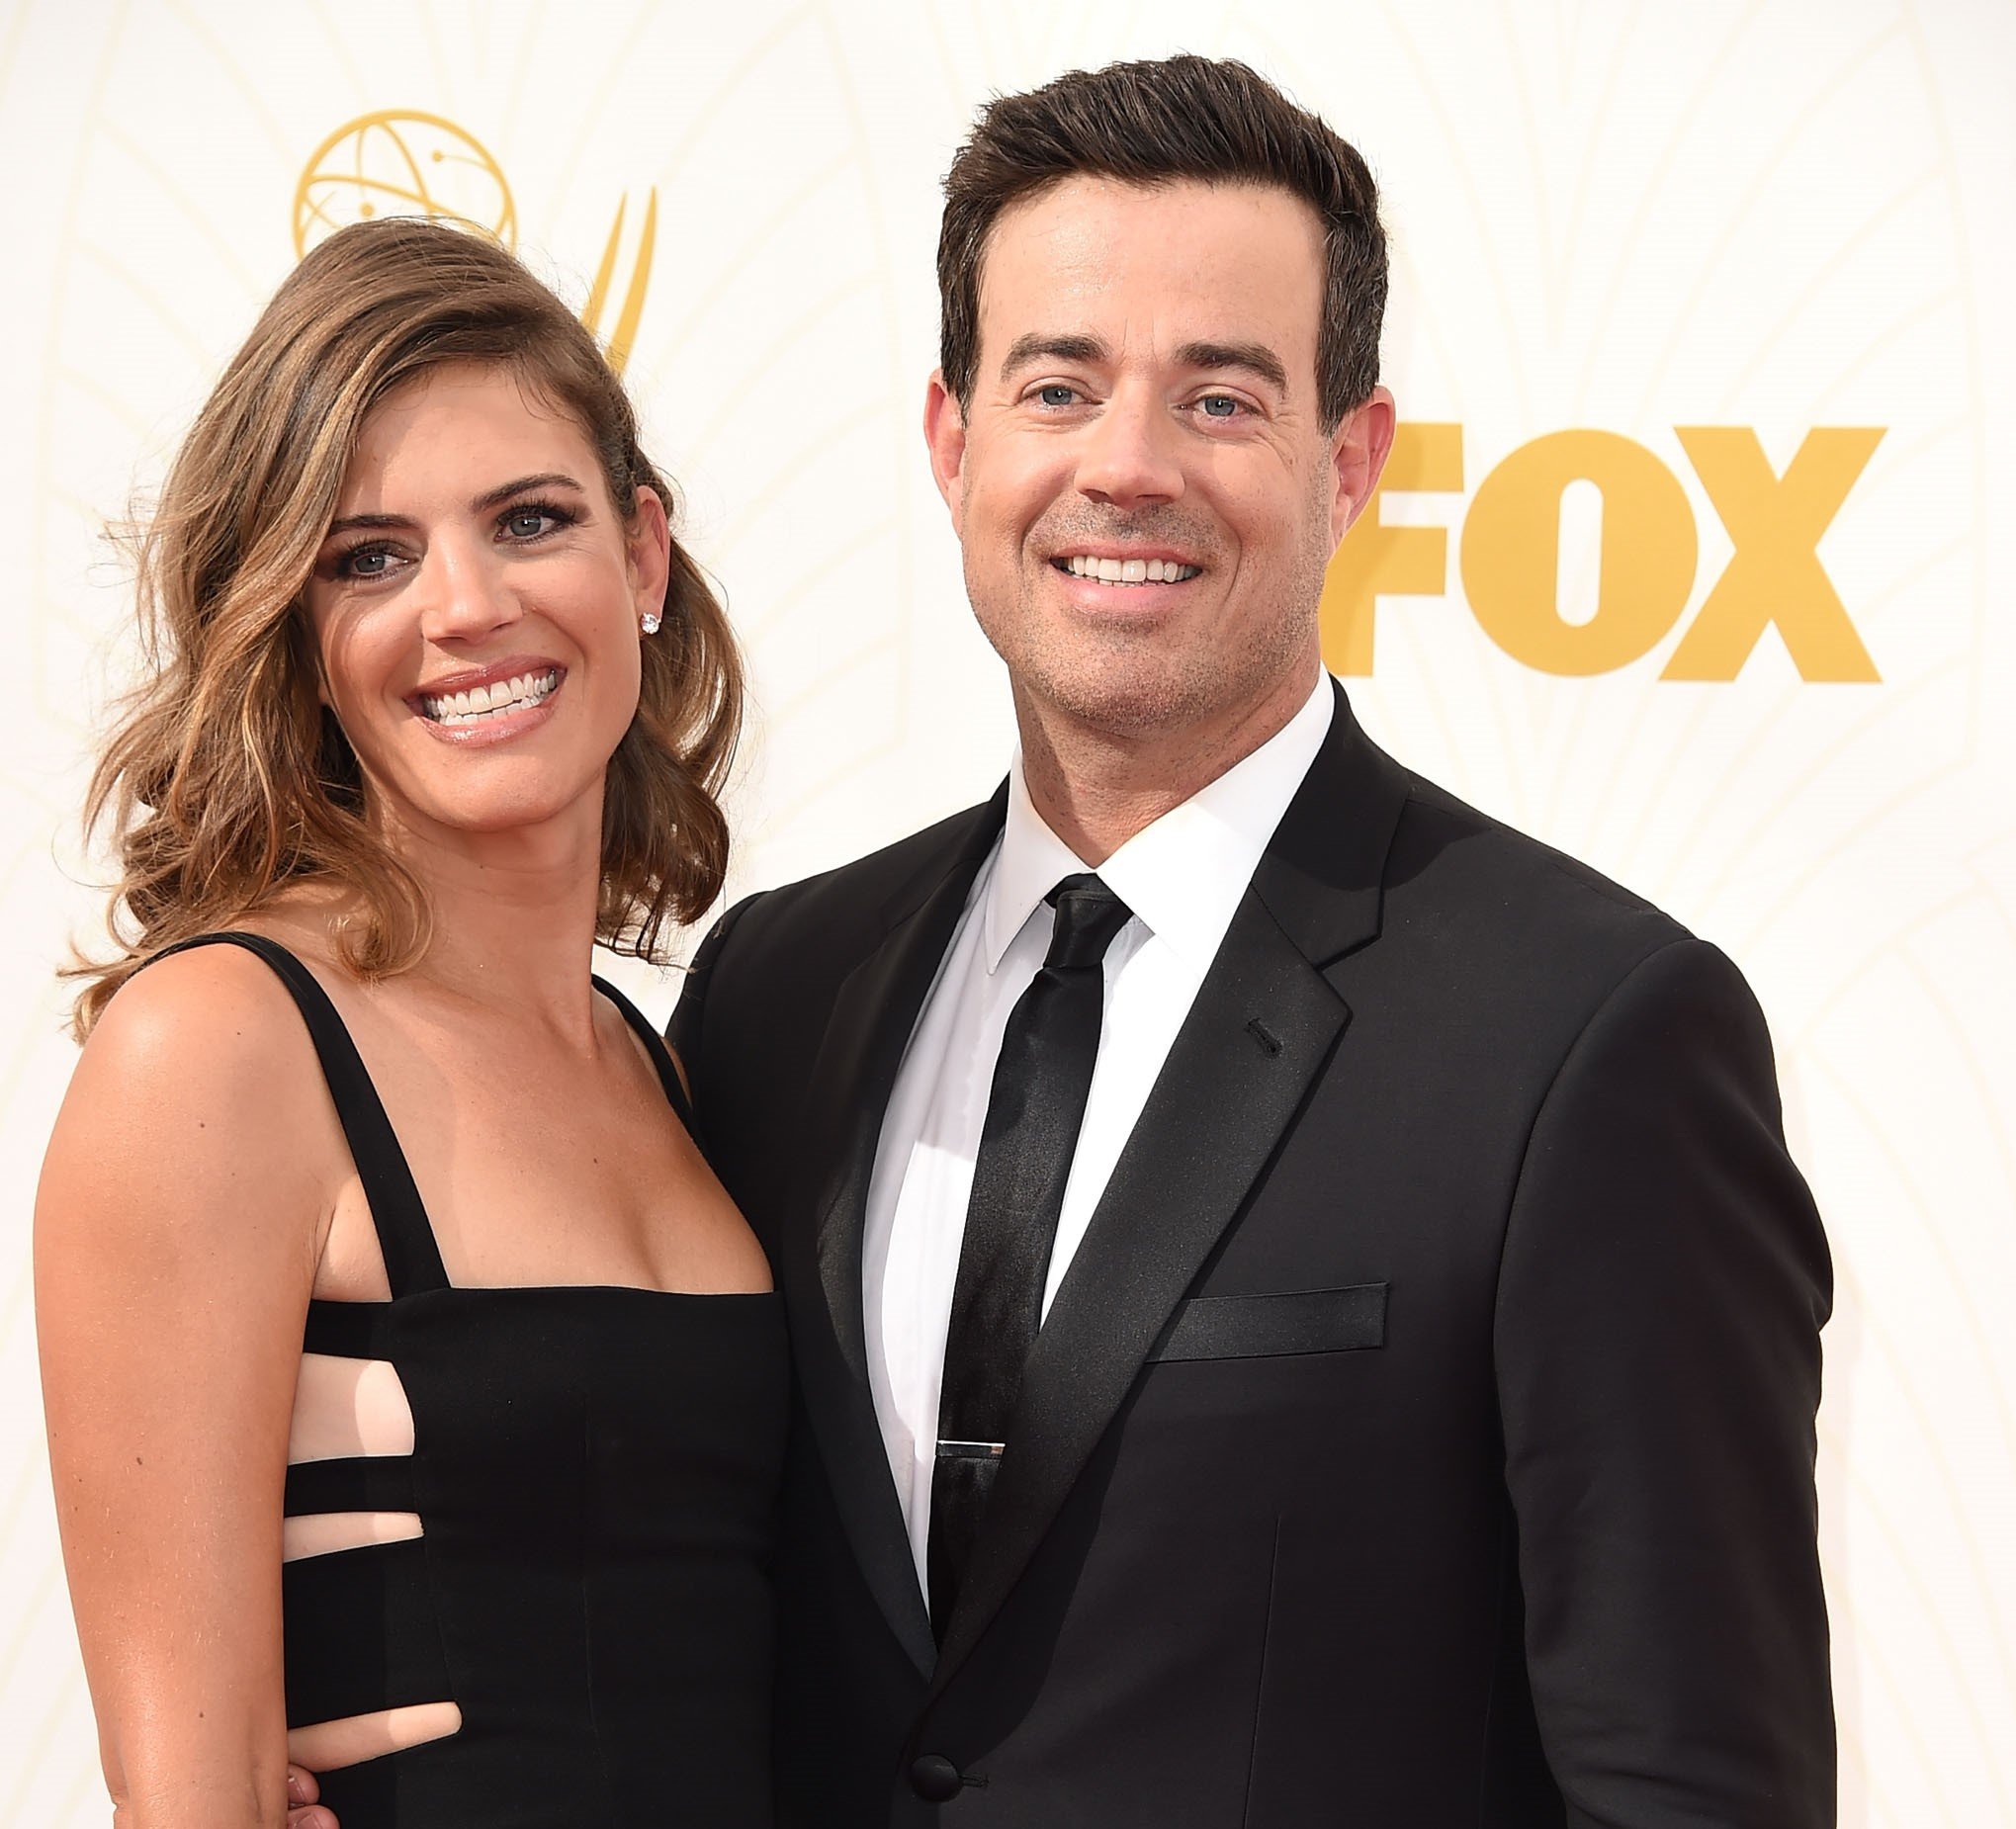  Siri Pinter and Carson Daly at the 67th Annual Primetime Emmy Awards in 2015 in Los Angeles, California. | Source: Getty Images